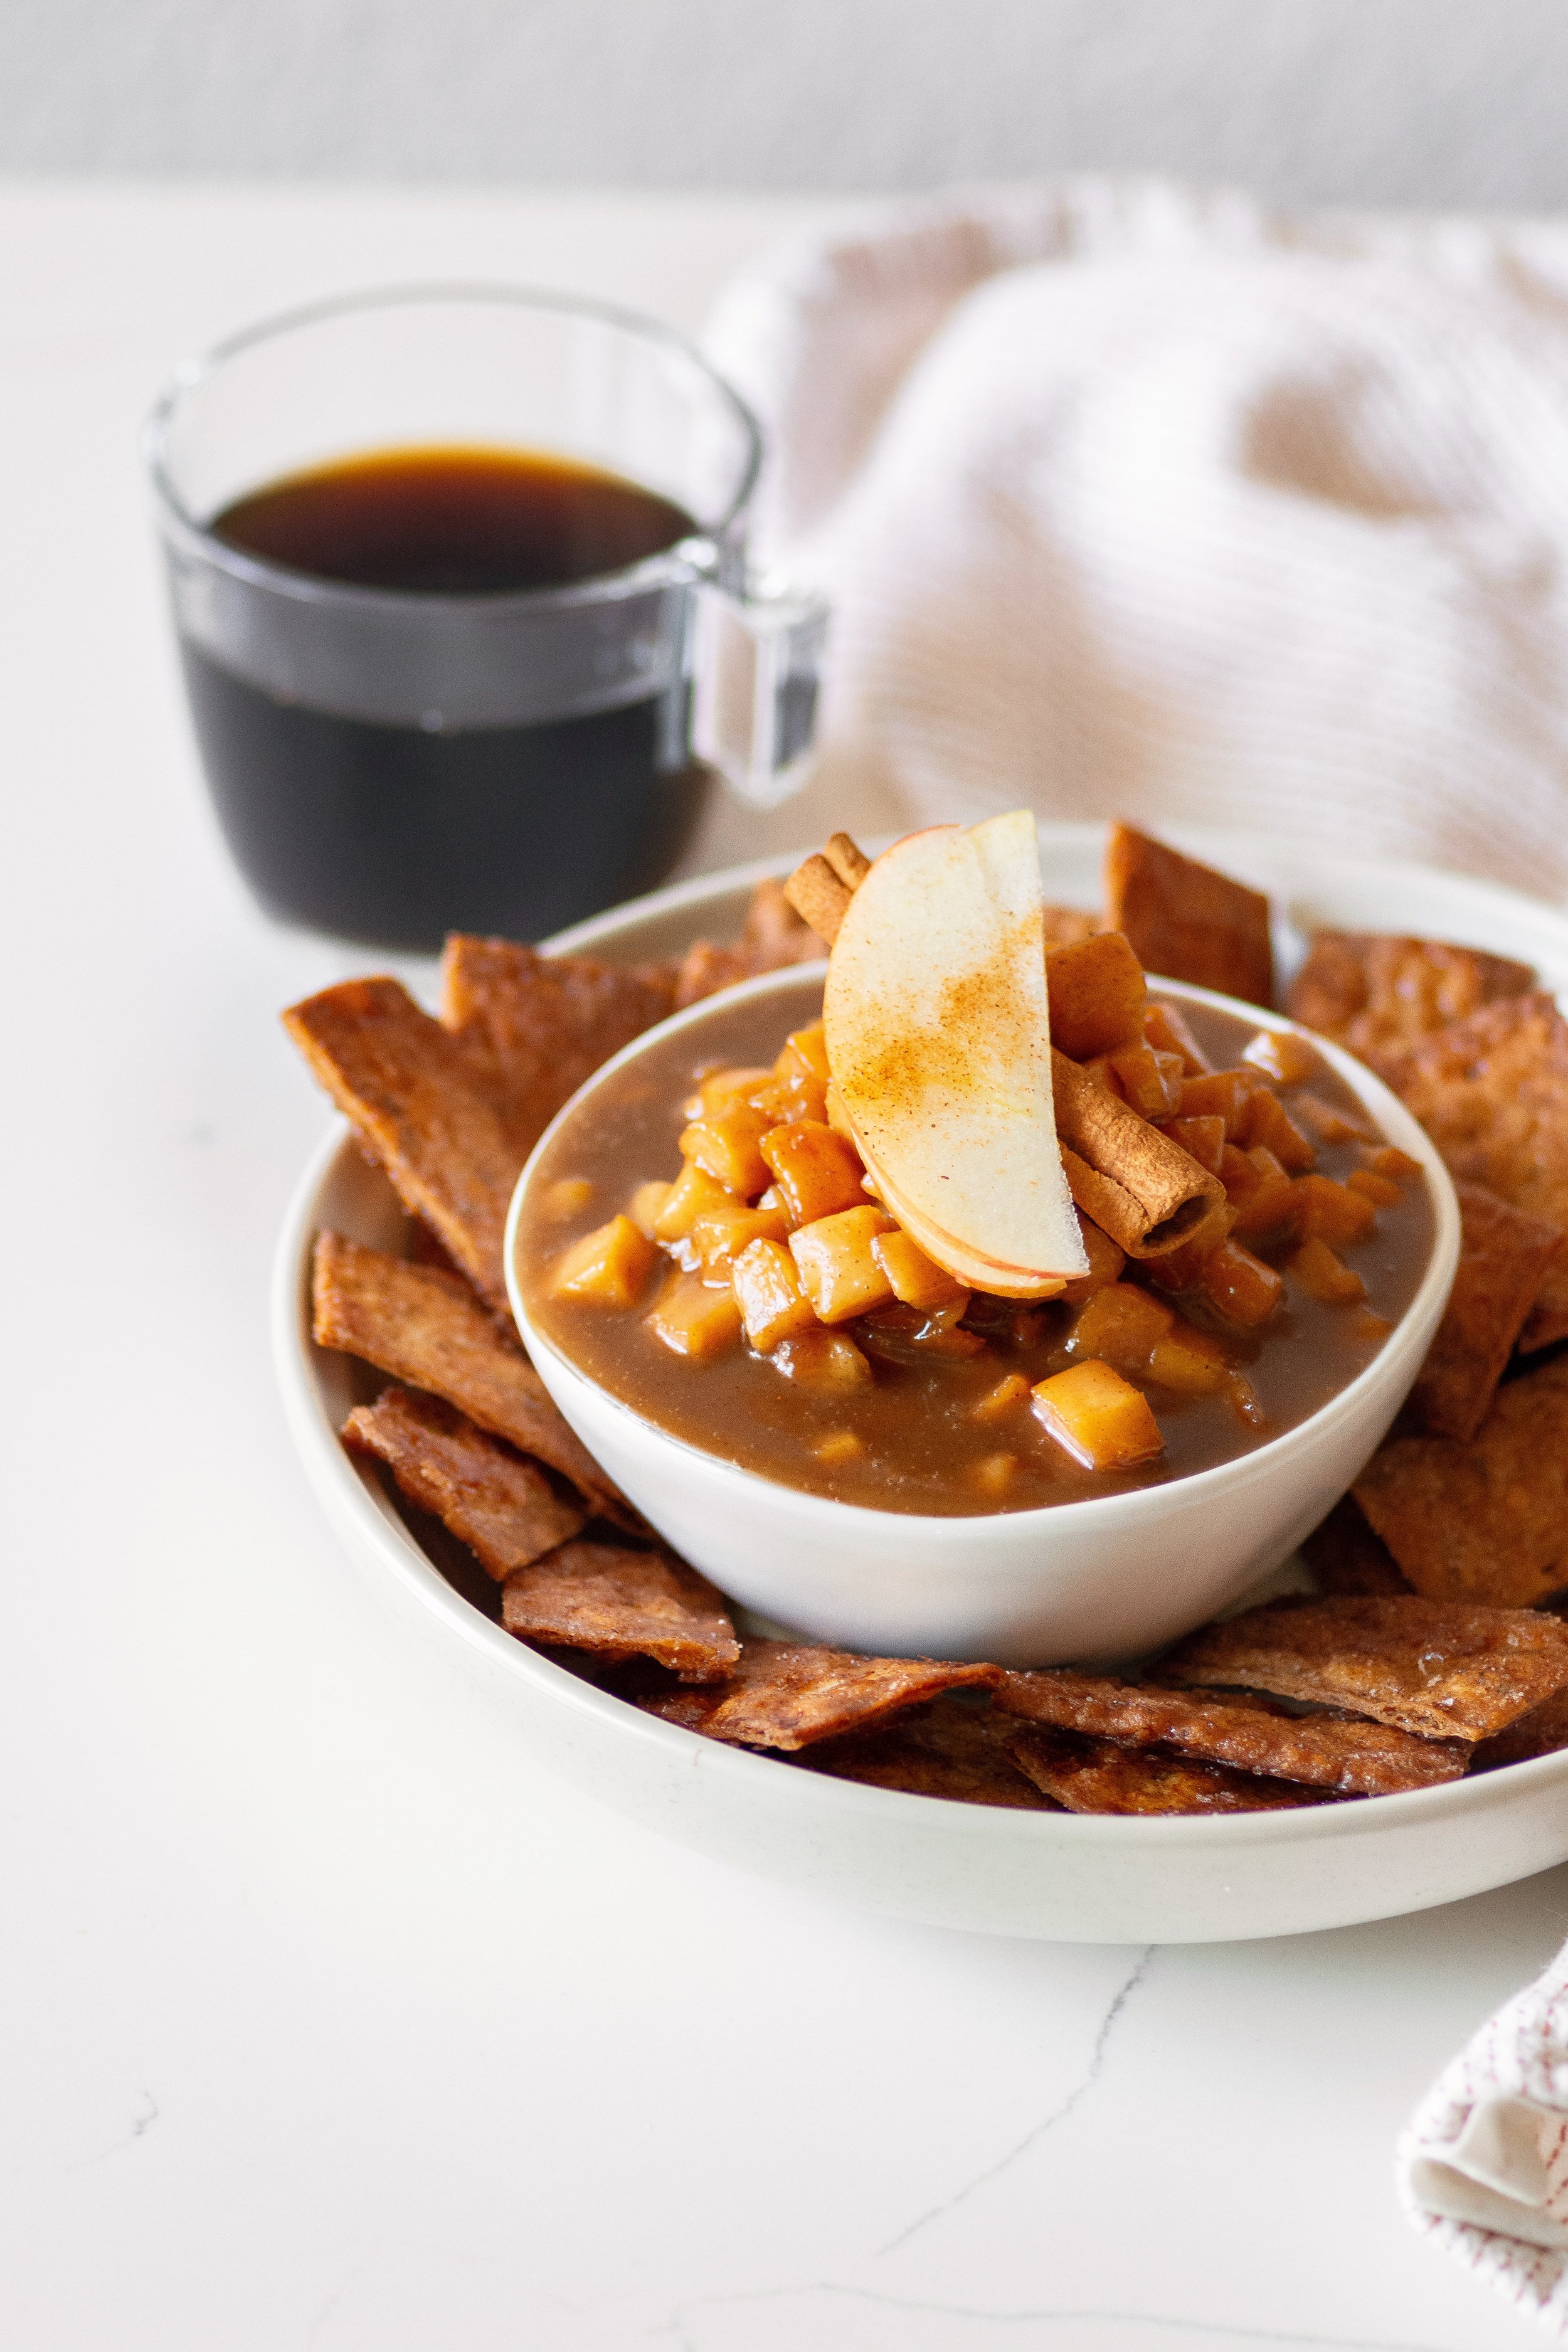 Oven-Baked Cinnamon Sugar Chips with Salted Caramel Apple Pie Dip with coffee